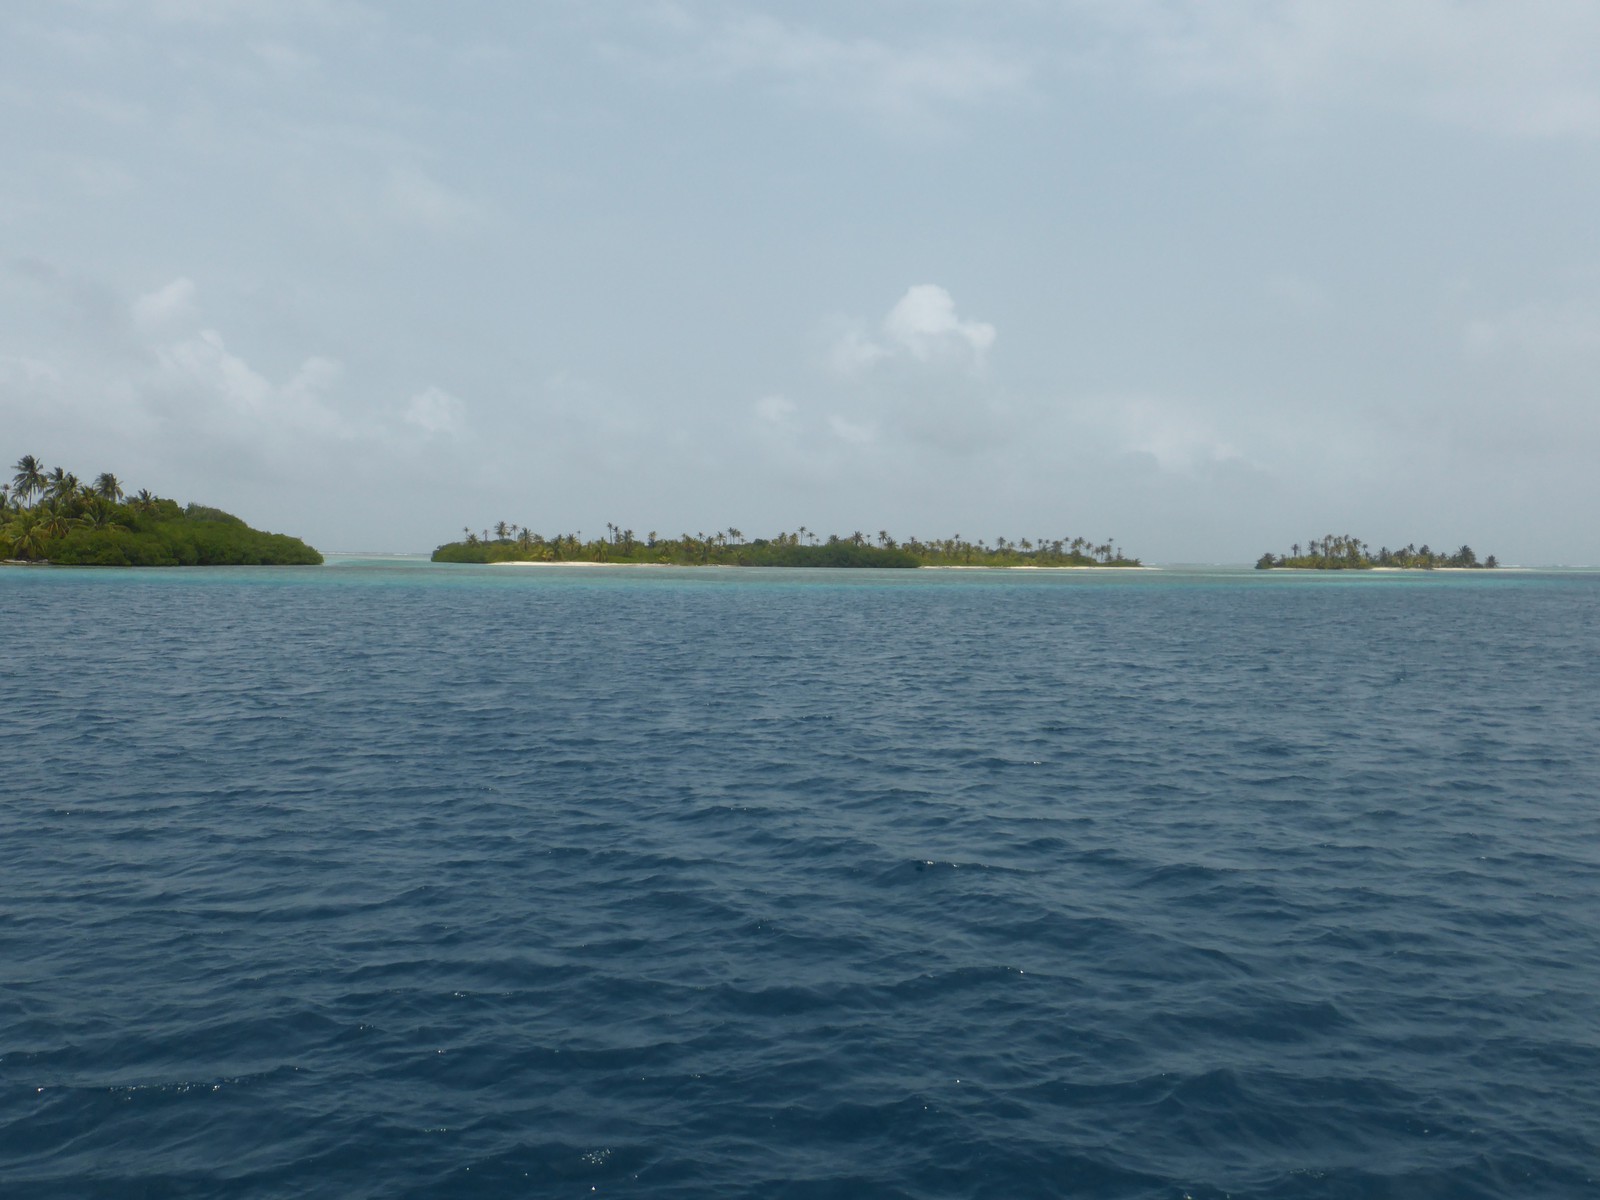 Some of the pretty islands of the Cayos Holandeses